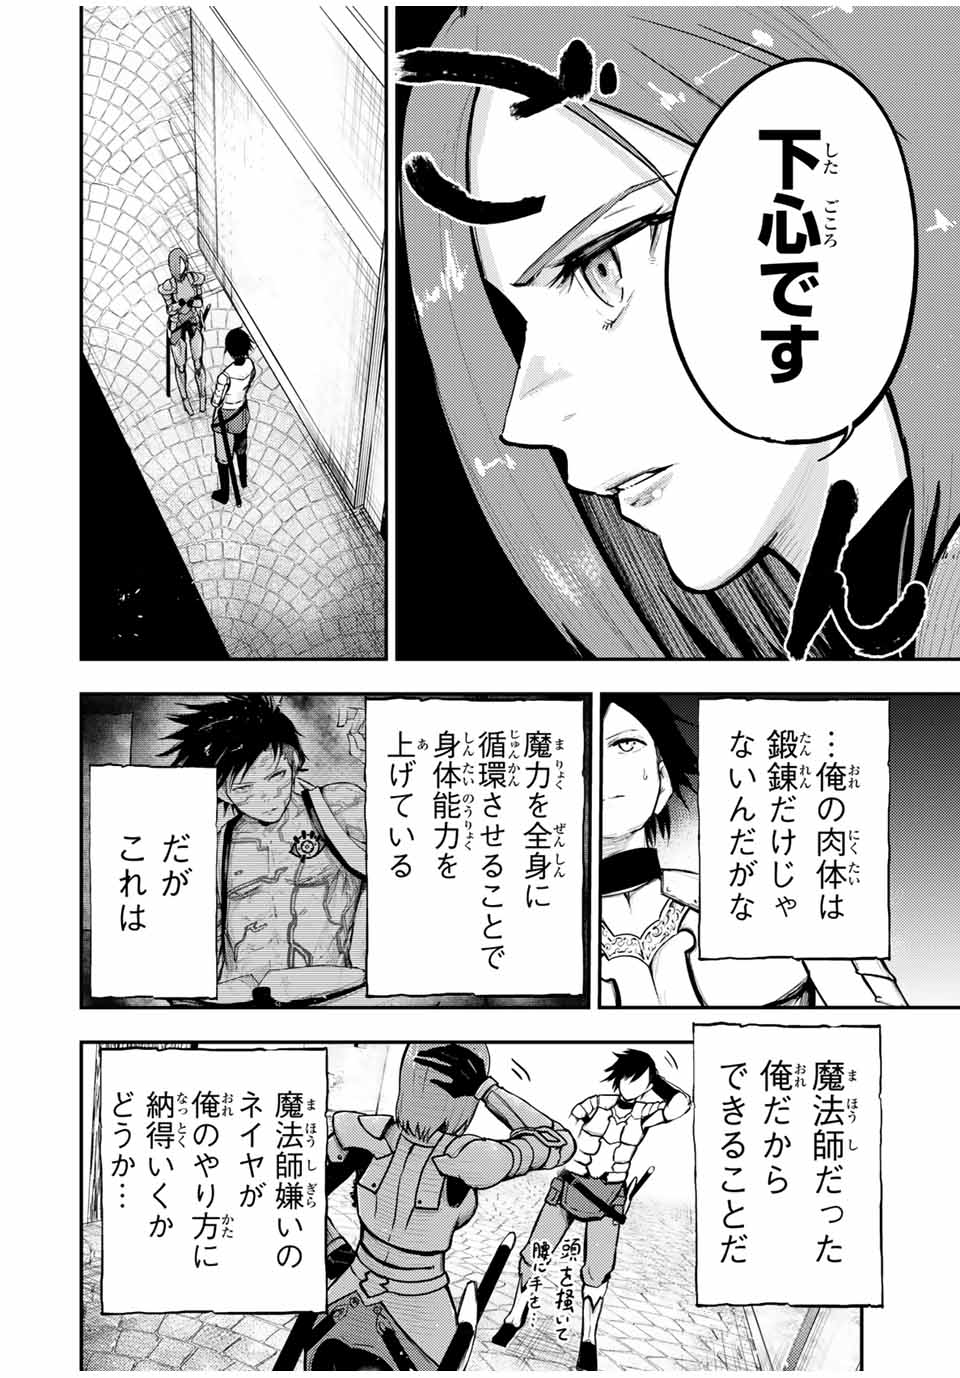 the strongest former prince-; 奴隷転生 ～その奴隷、最強の元王子につき～ 第32話 - Page 18